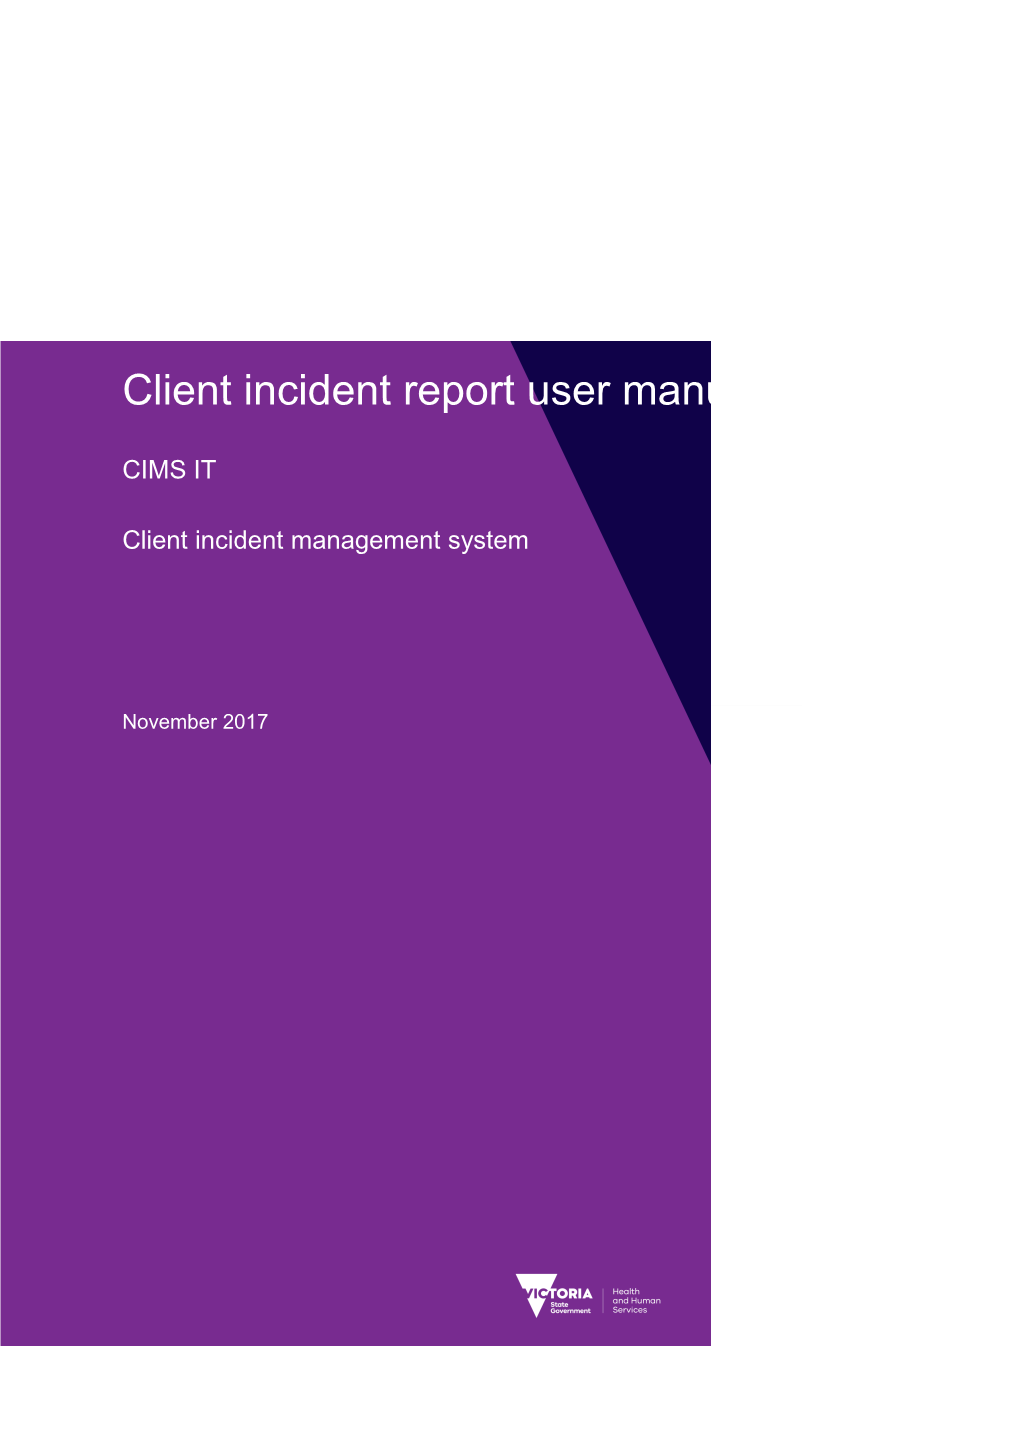 CIMS Client Incident IT User Manual - Reporting Form